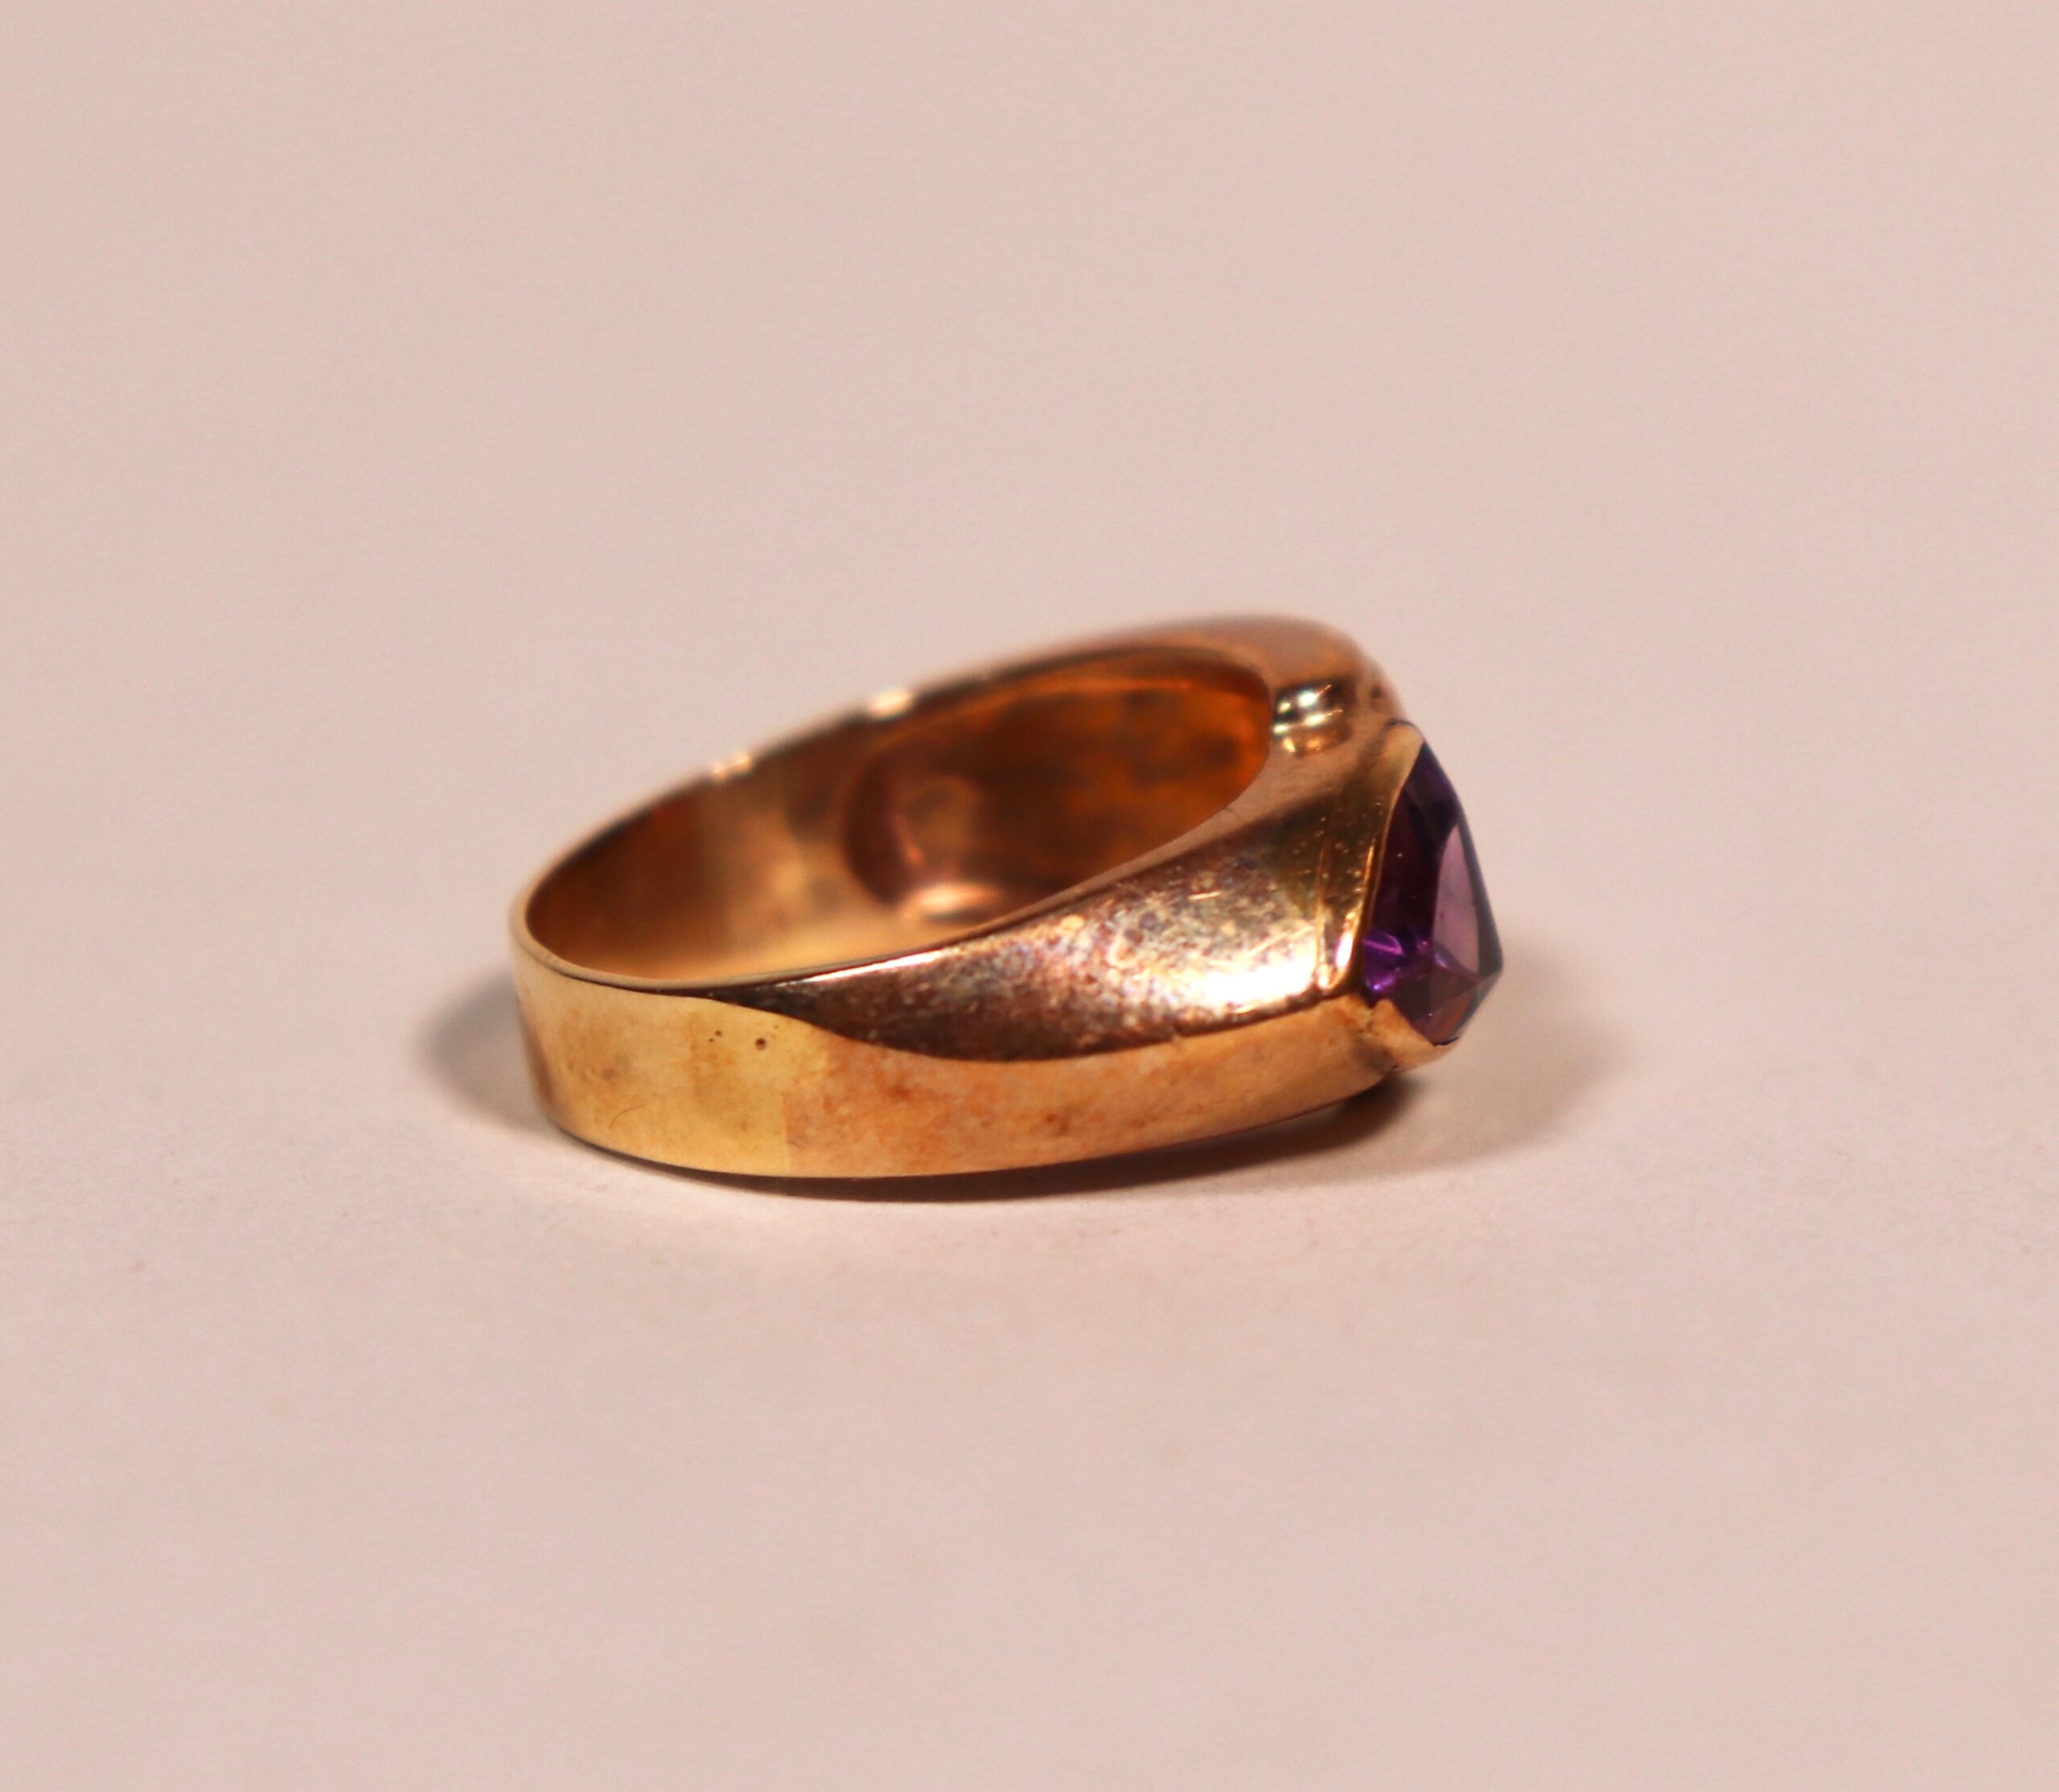 Vintage Amethyst 14K Gold Ring - Antiques Resources, Chicago